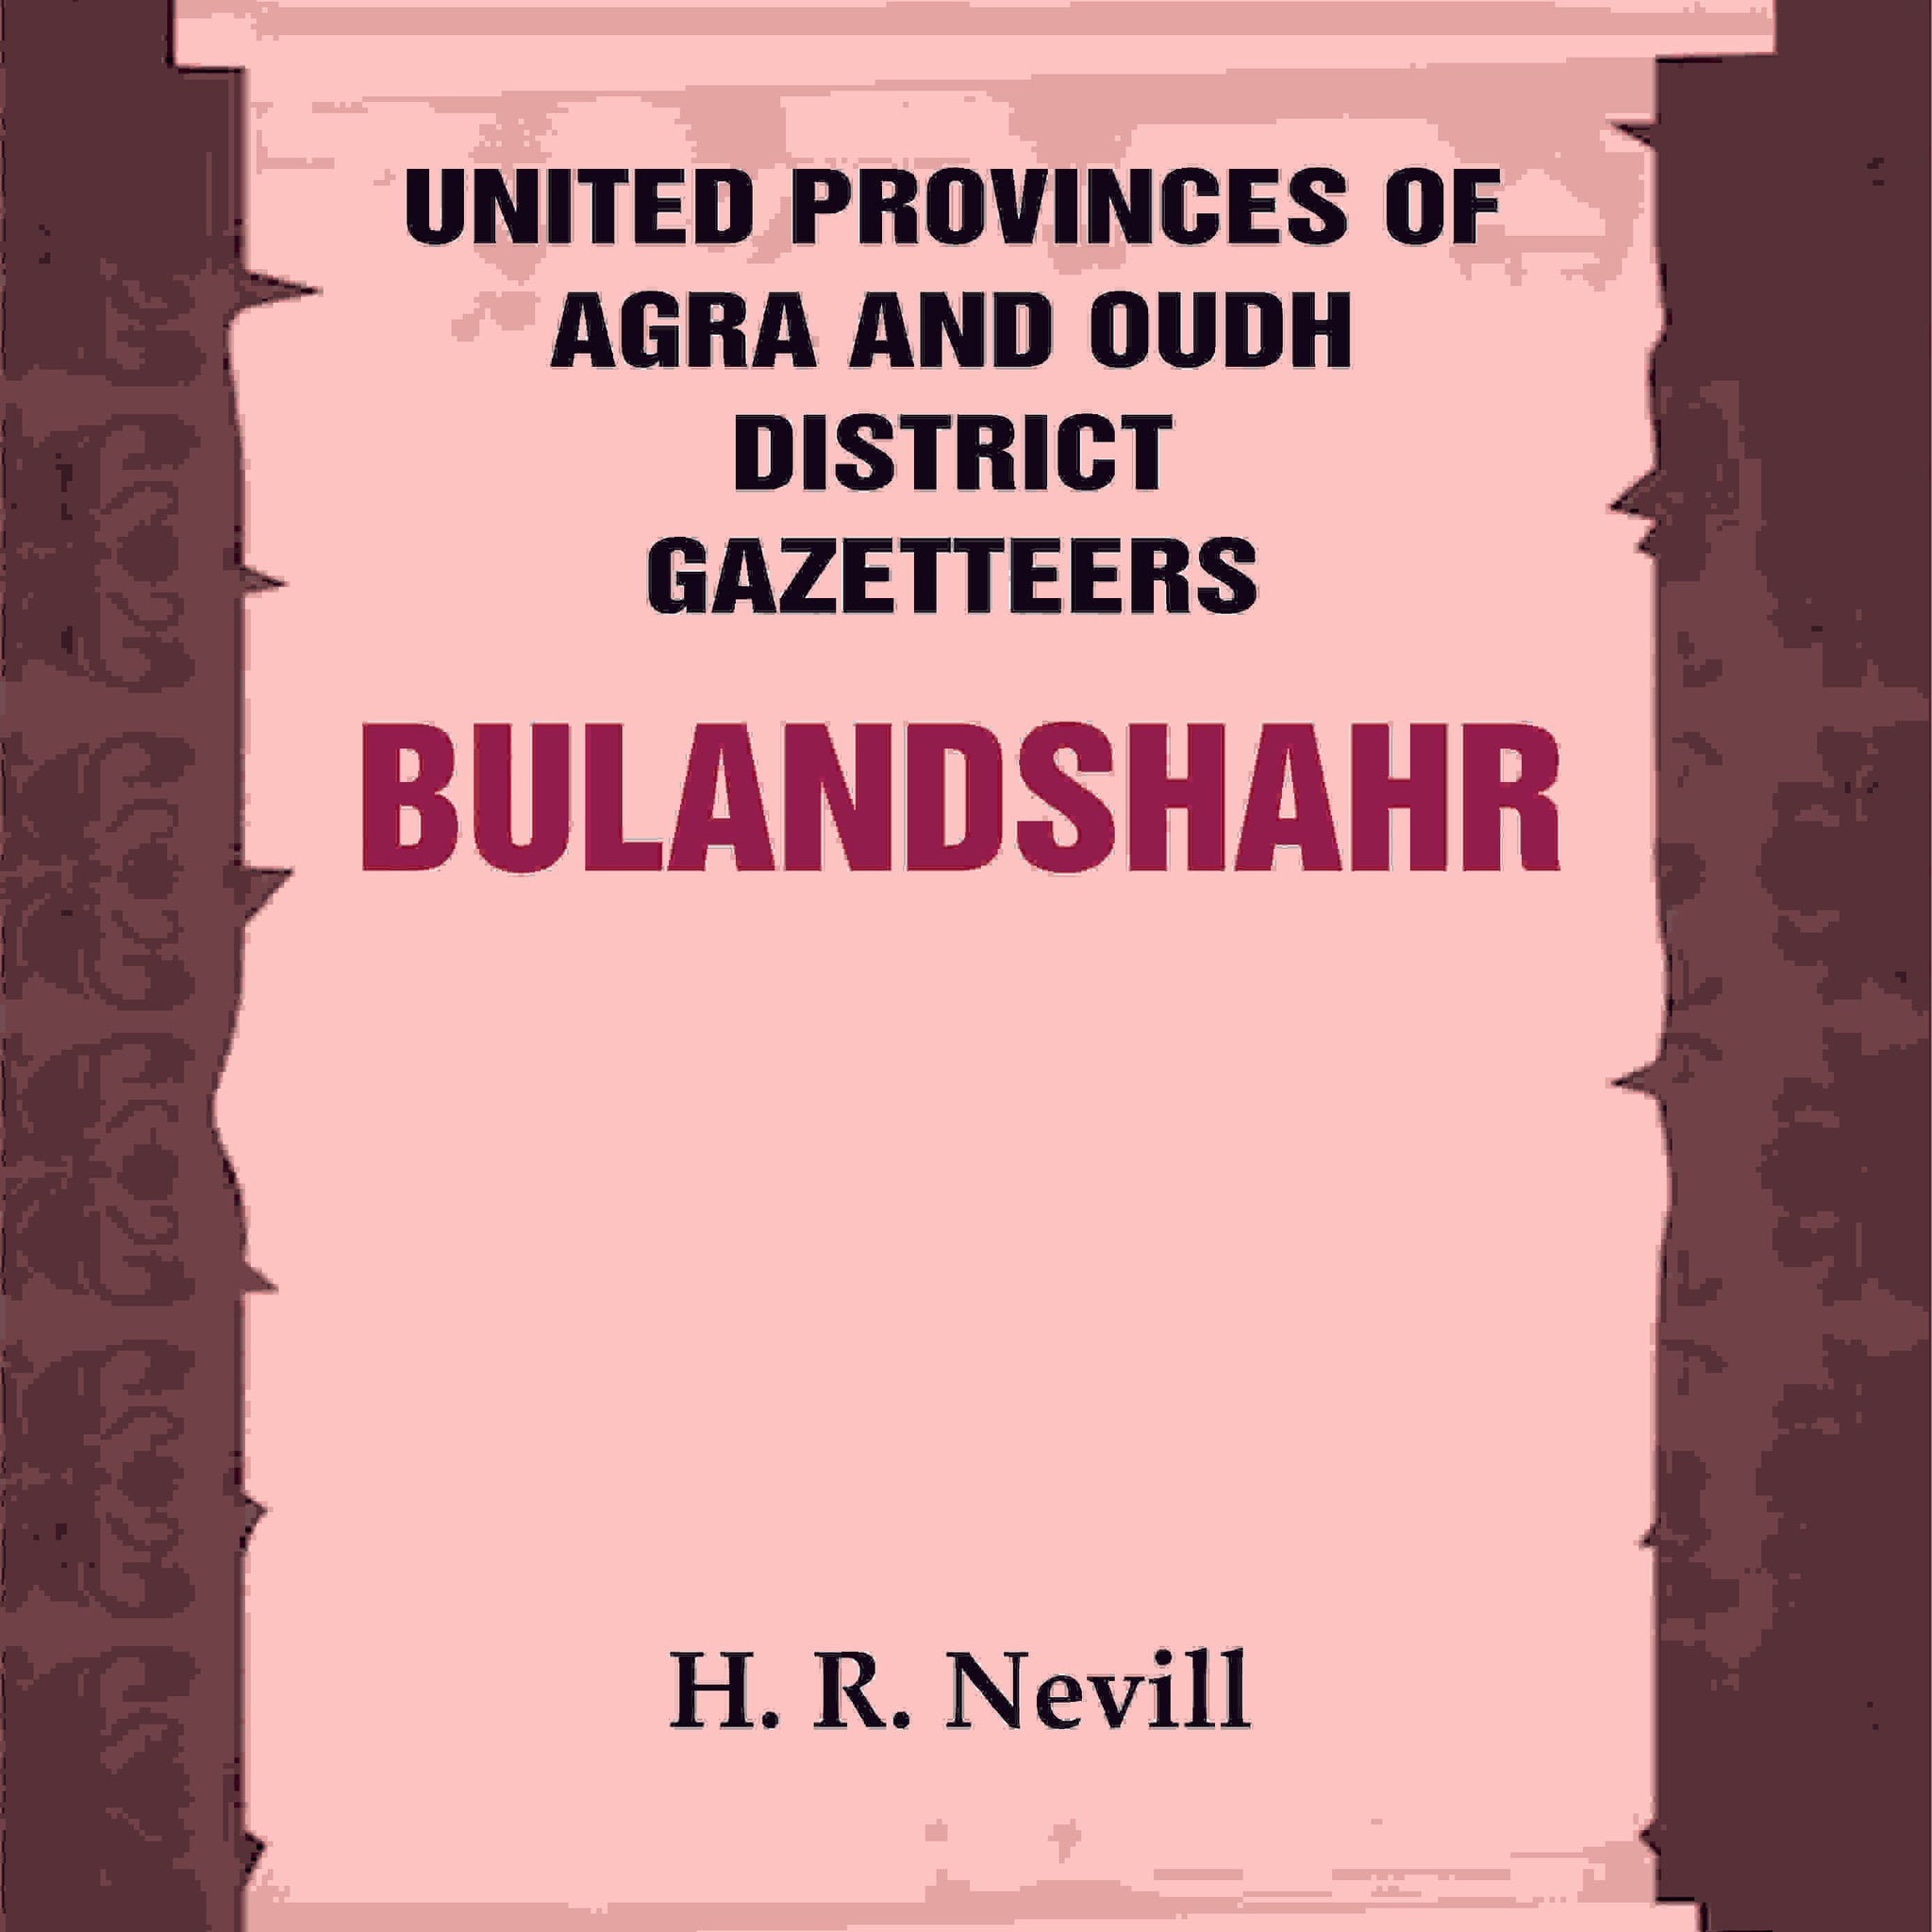 United Provinces of Agra and Oudh District Gazetteers: Bulandshahr